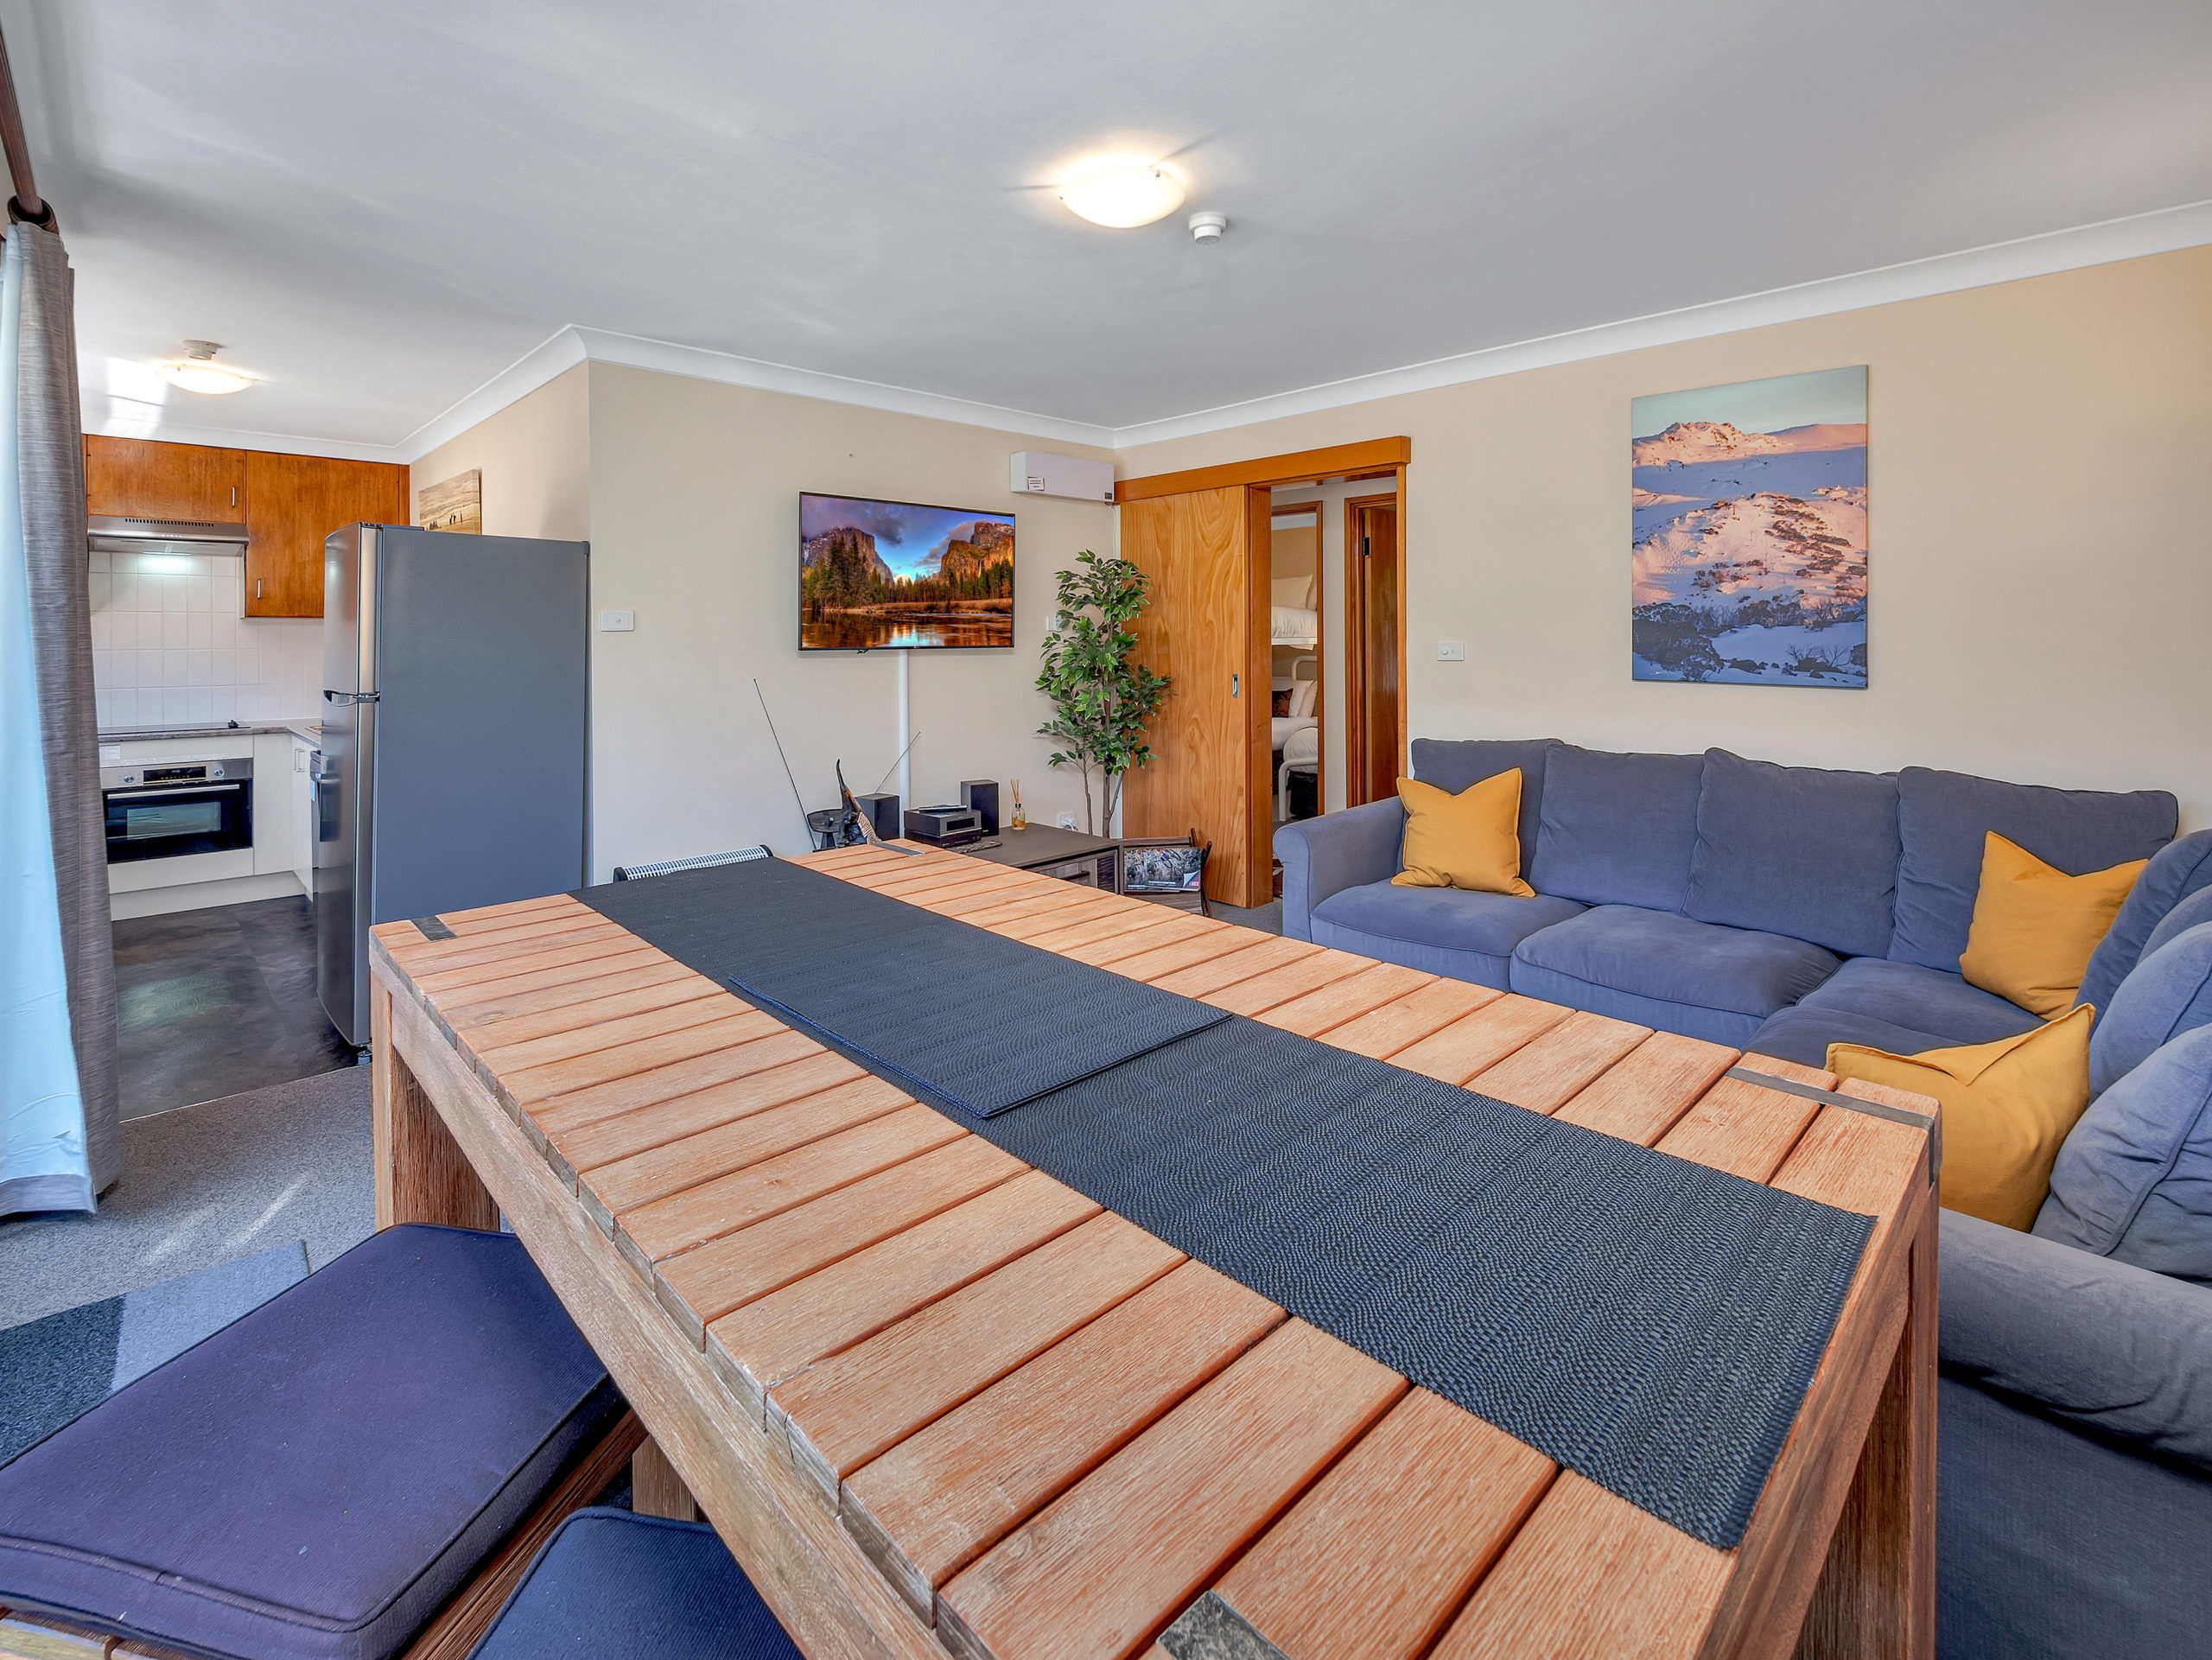 Fully Furnished 2 Bedroom Apartment with Stunning Mountain and River Views – Offers Invited Over $950,000